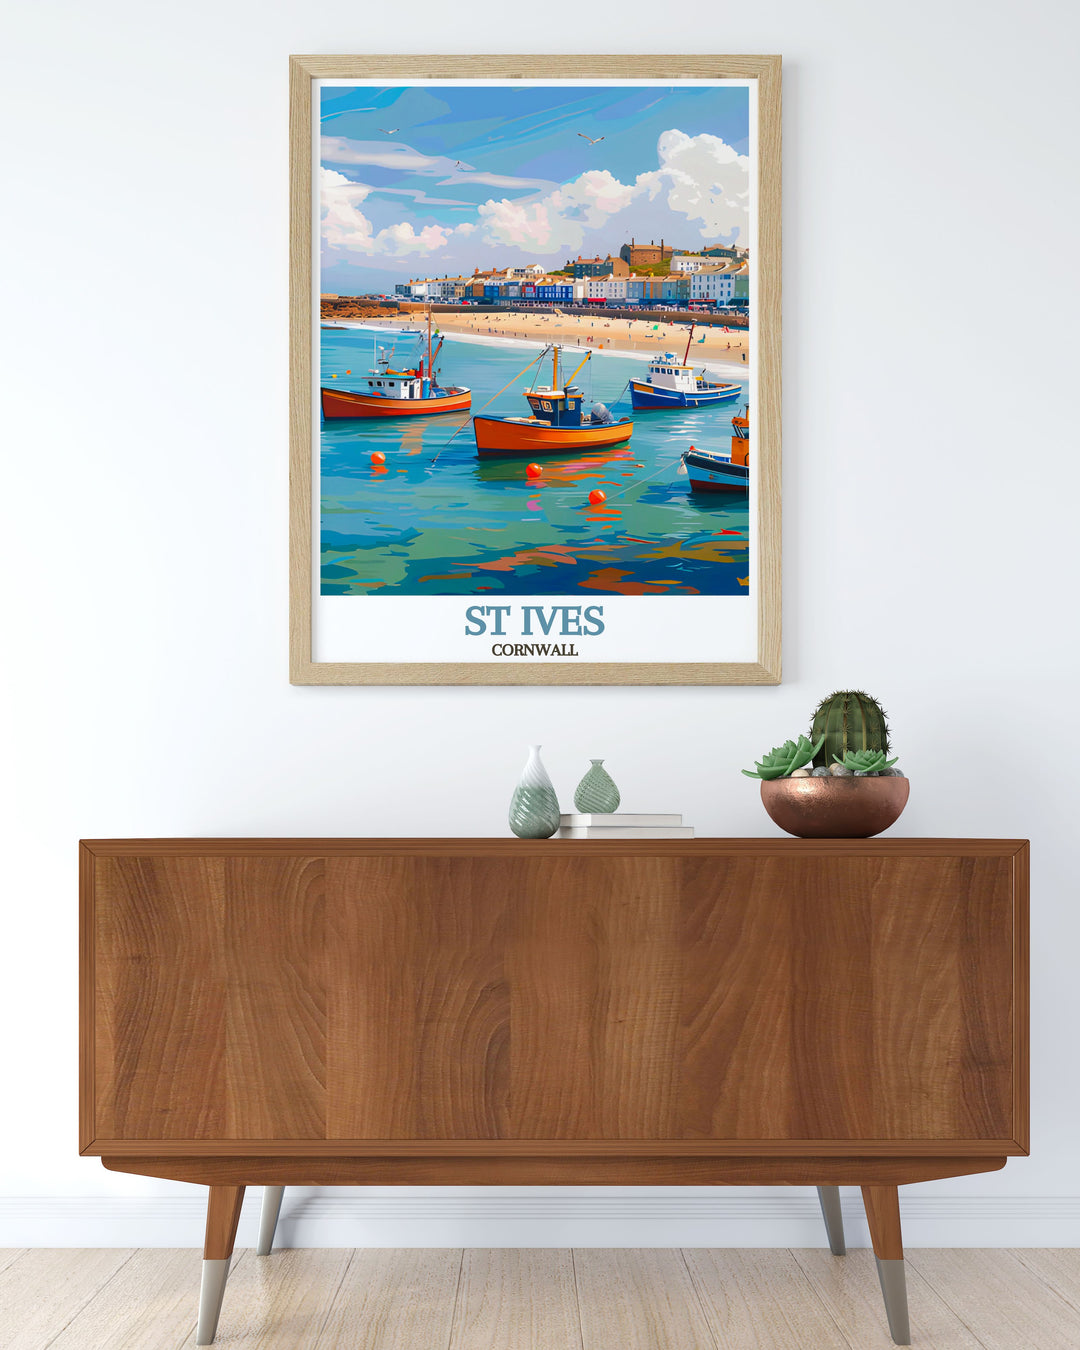 St Ives Harbour is beautifully illustrated in this poster, showcasing its historical significance and bustling activity, perfect for art enthusiasts and travelers alike.